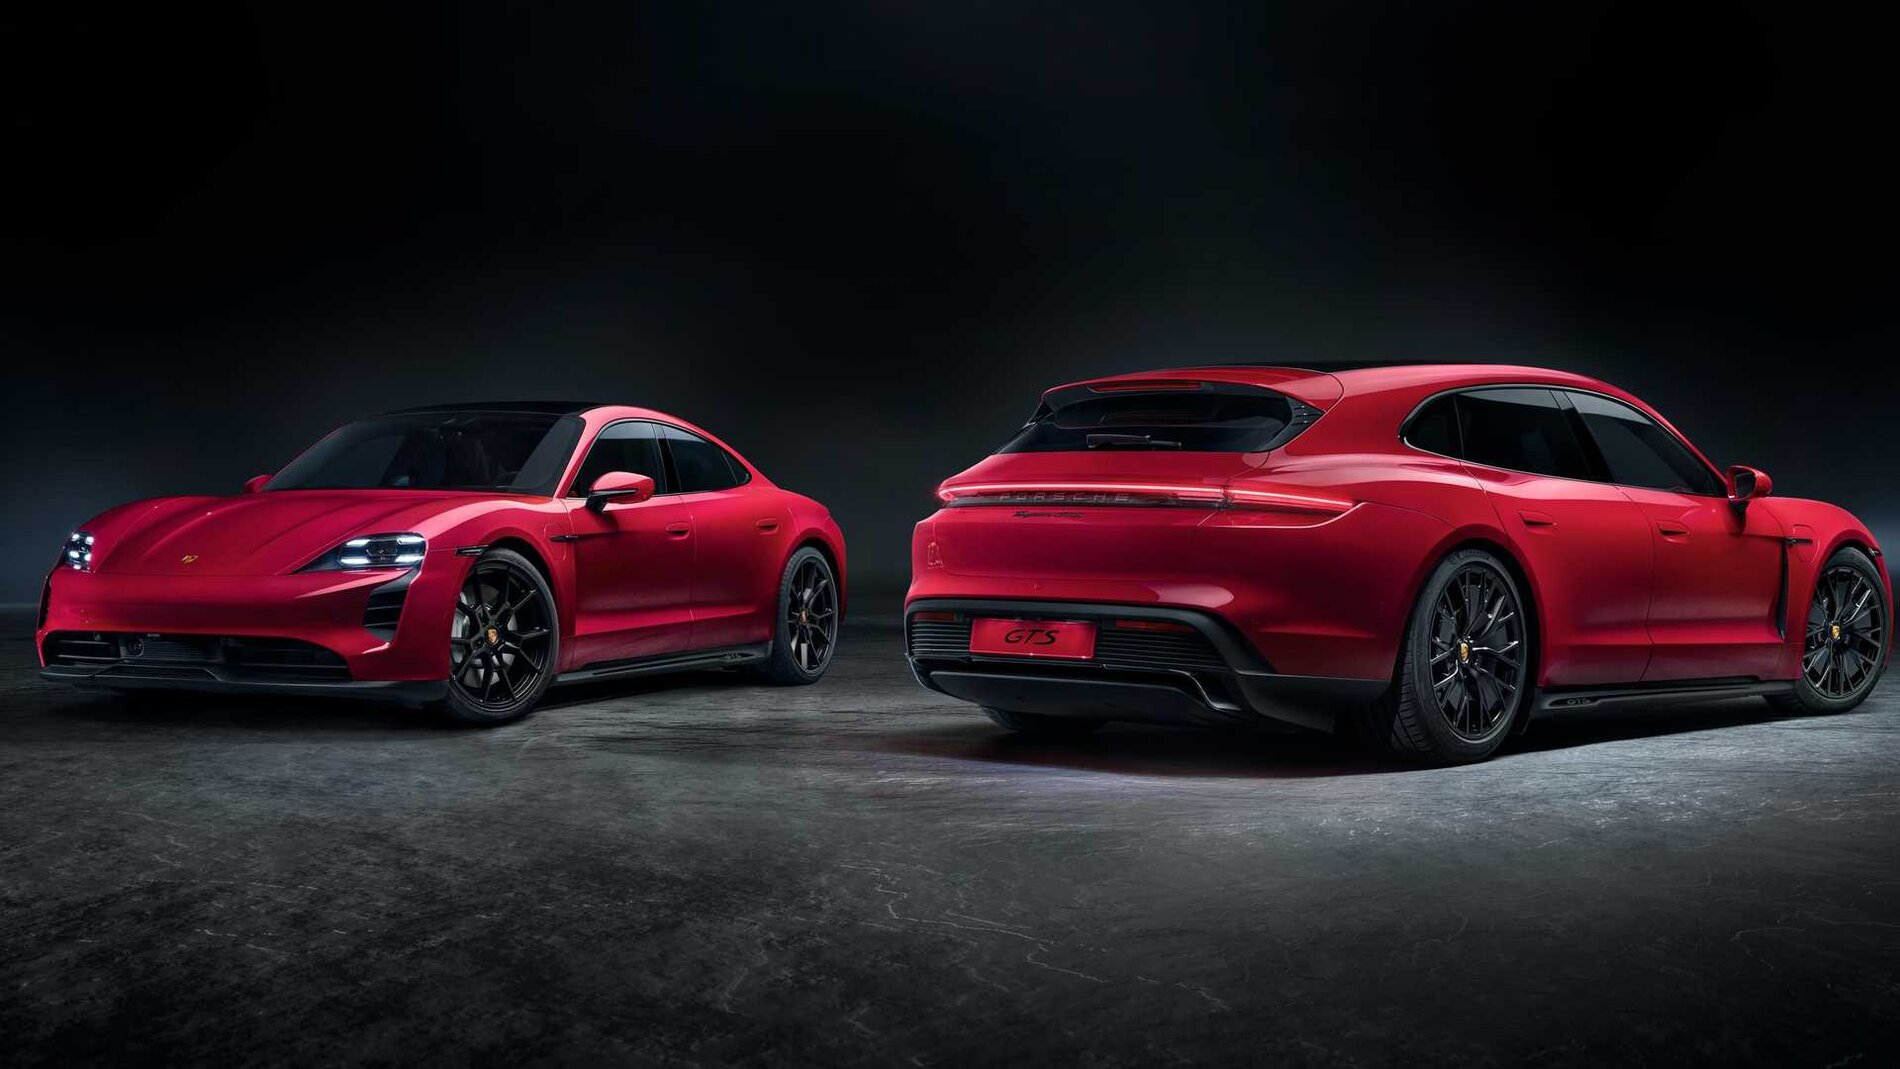 Porsche Taycan First 2022 Taycan GTS and Sport Turismo GTS Photos! 2022-porsche-taycan-gts-sedan-and-gts-sport-turismo